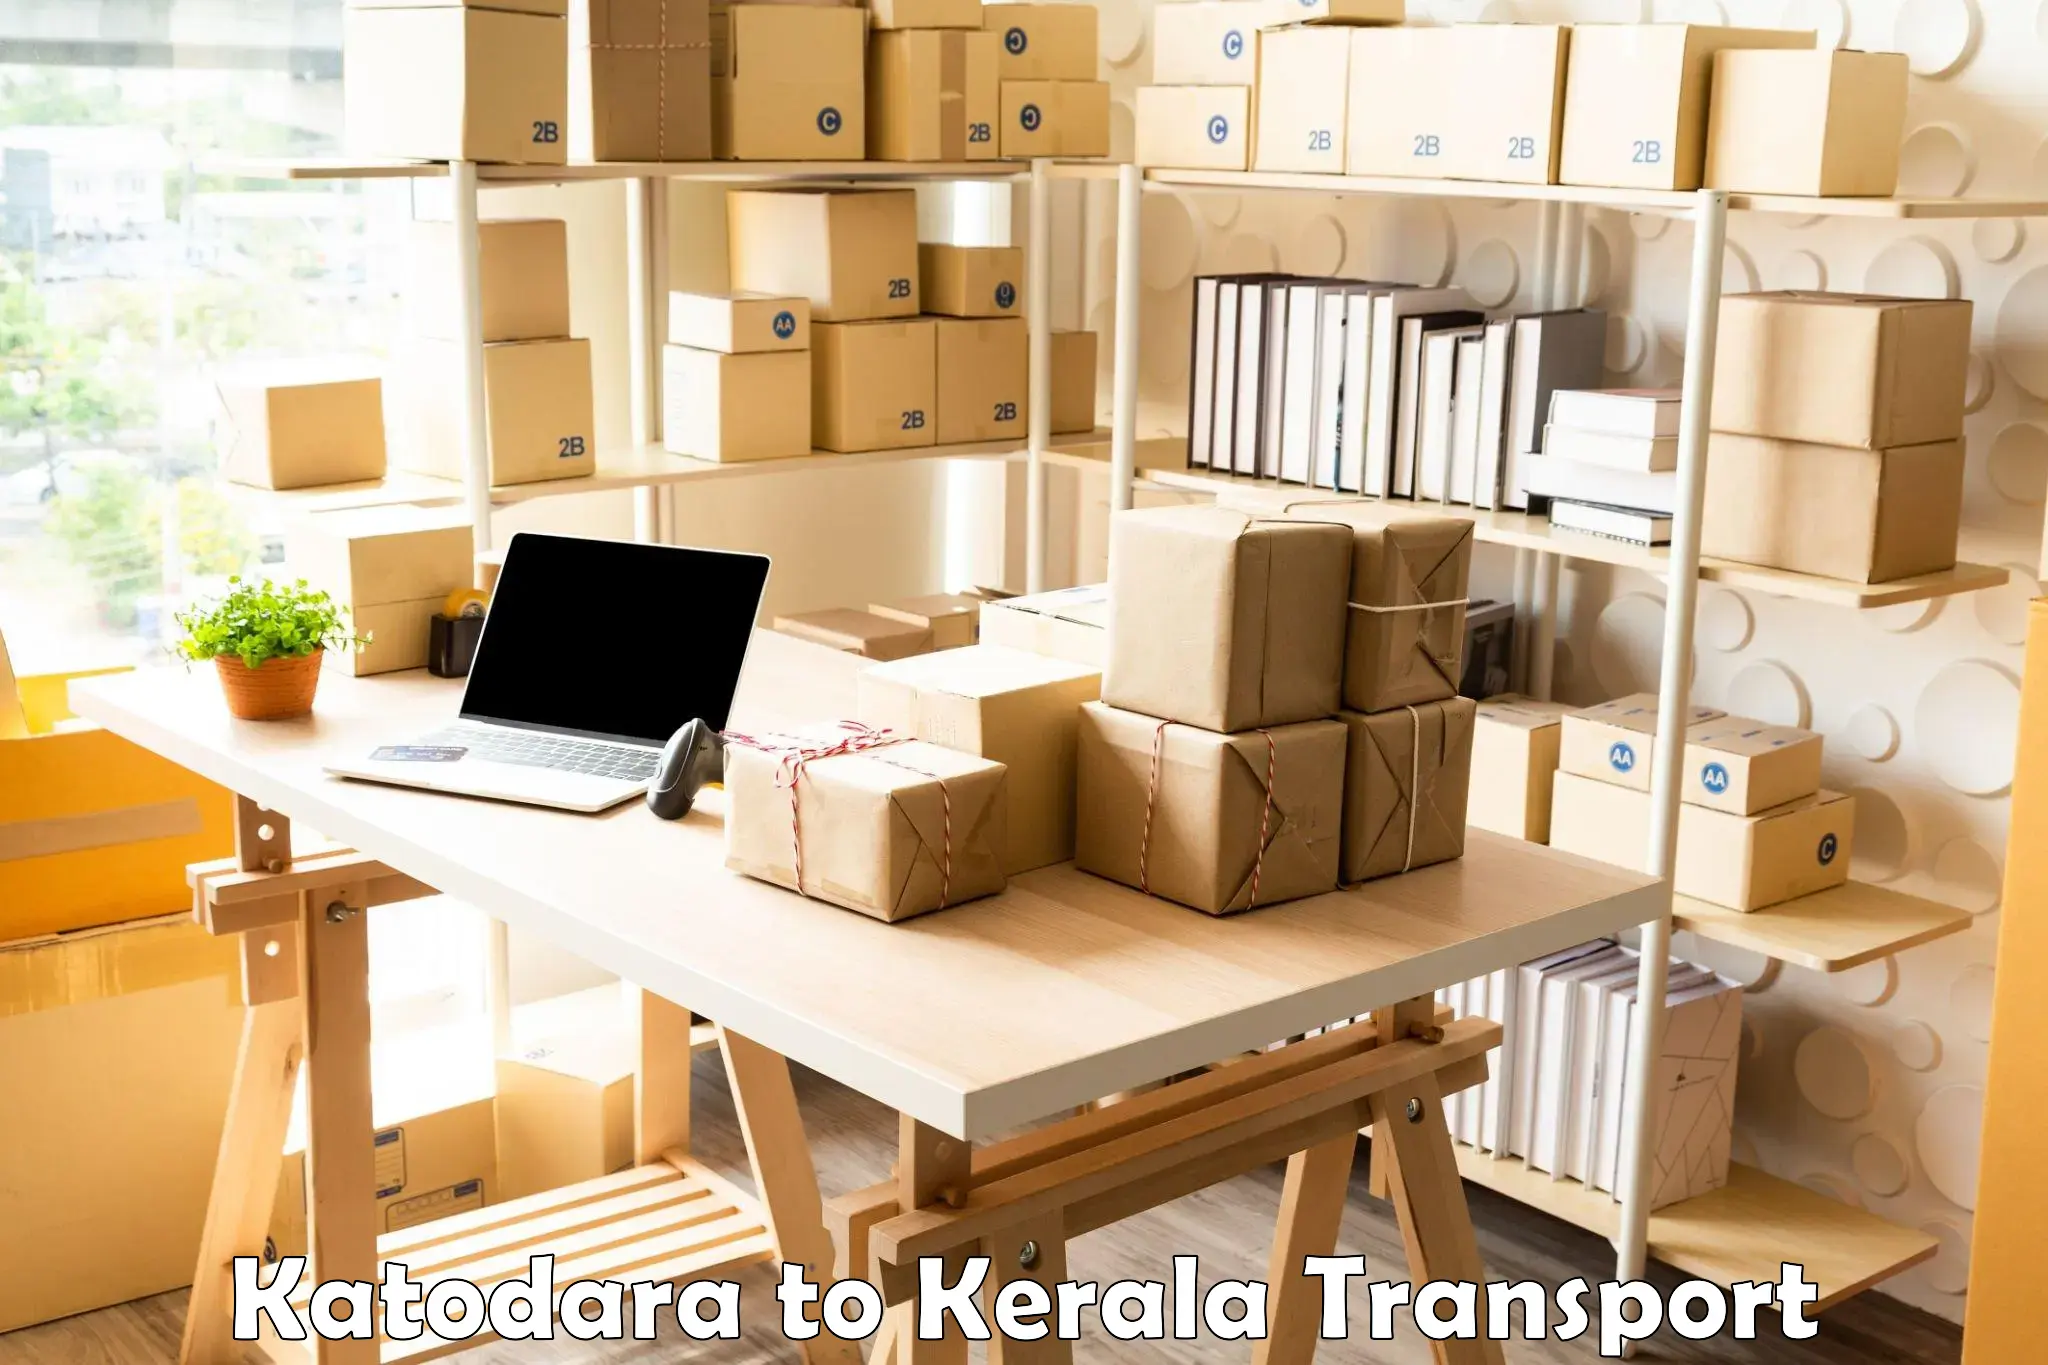 Package delivery services Katodara to Kerala